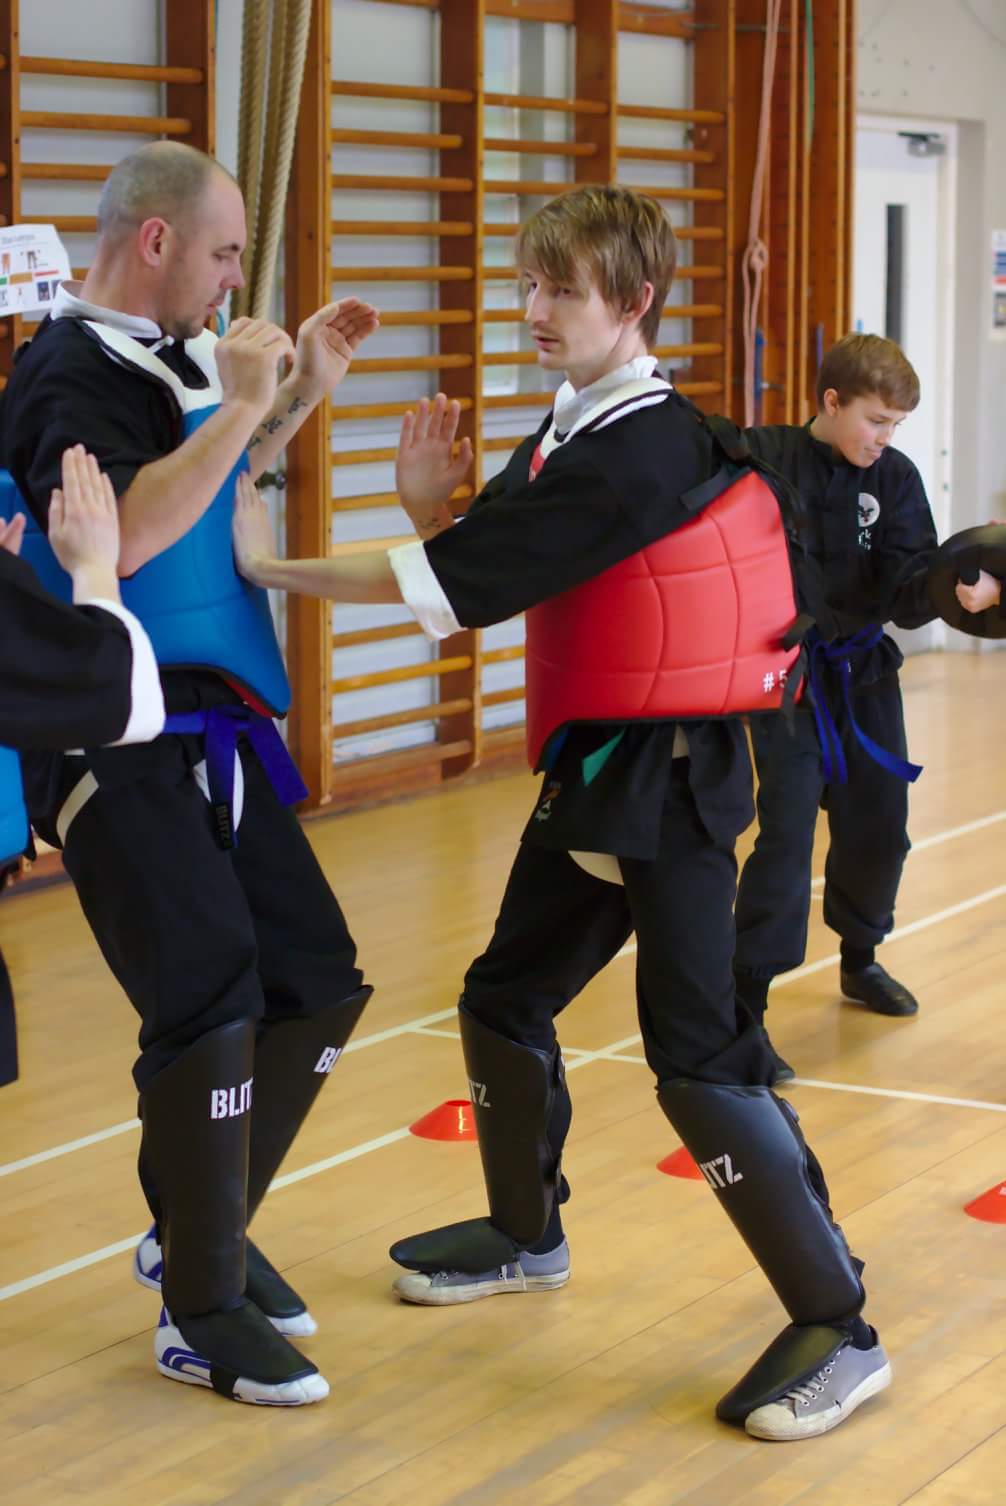 2 male students sparring during Kung Fu grading